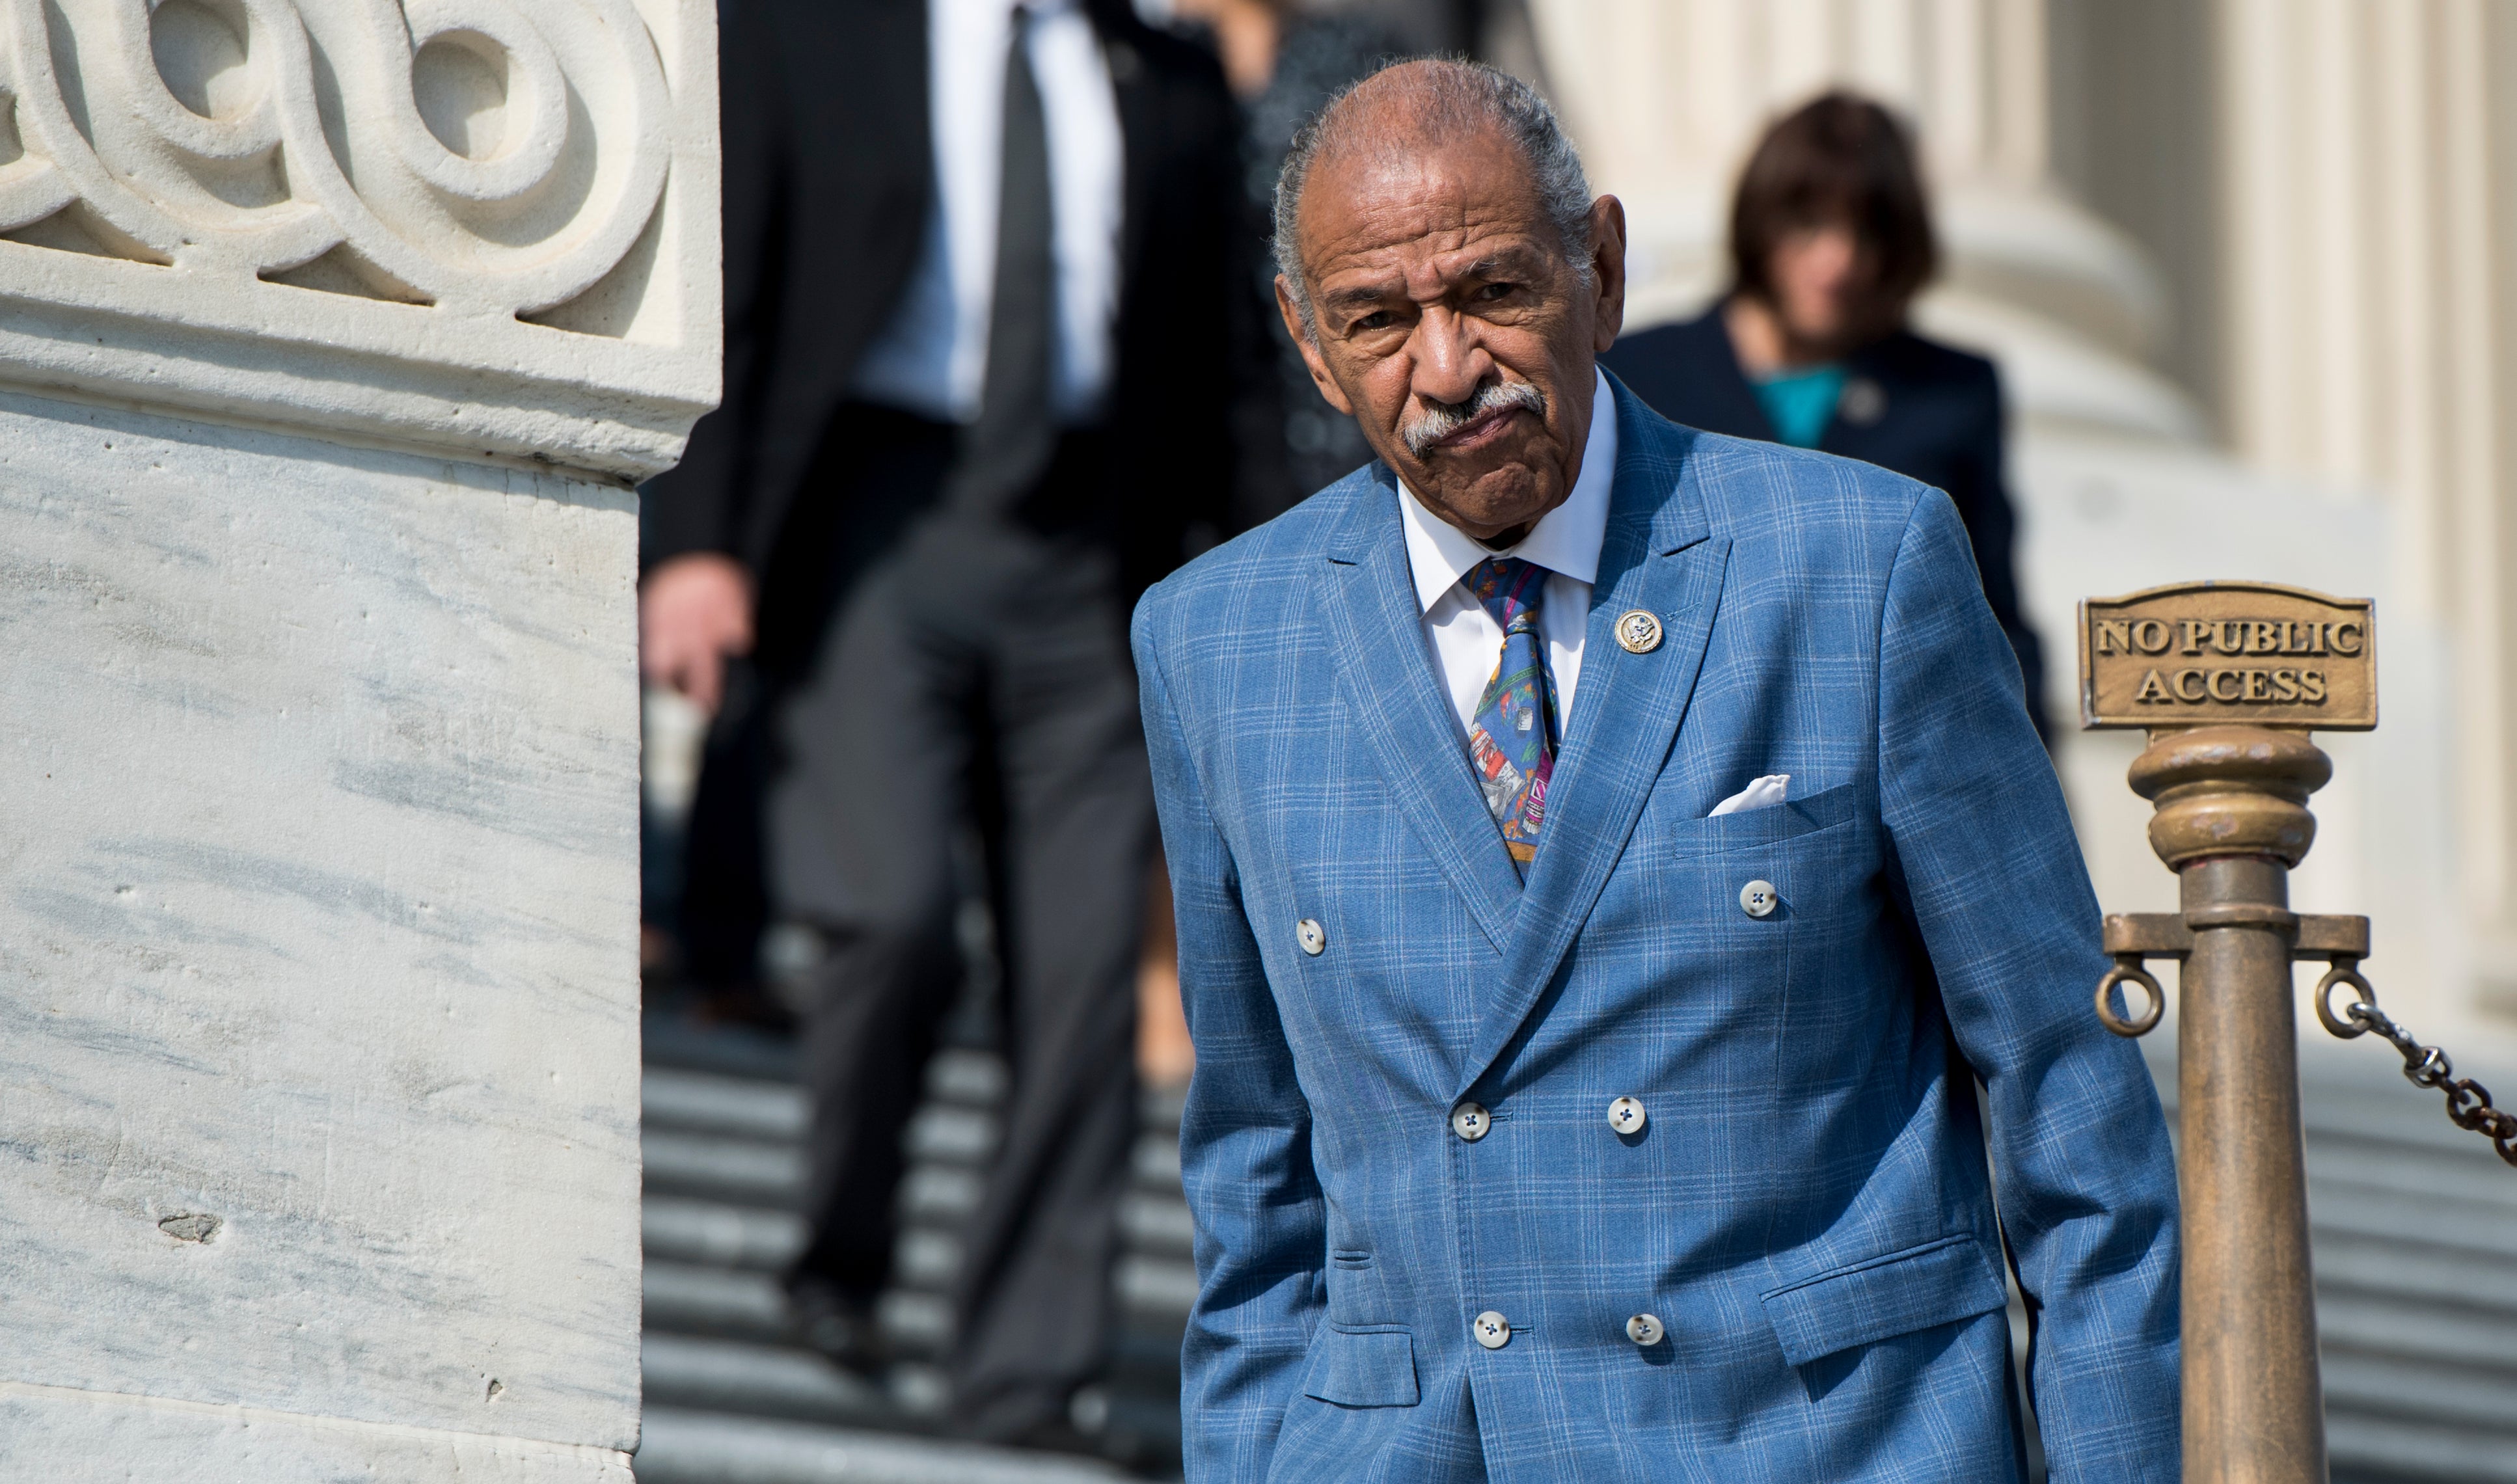 Nancy Pelosi Says John Conyers Should Resign Over Sexual Harassment Allegations